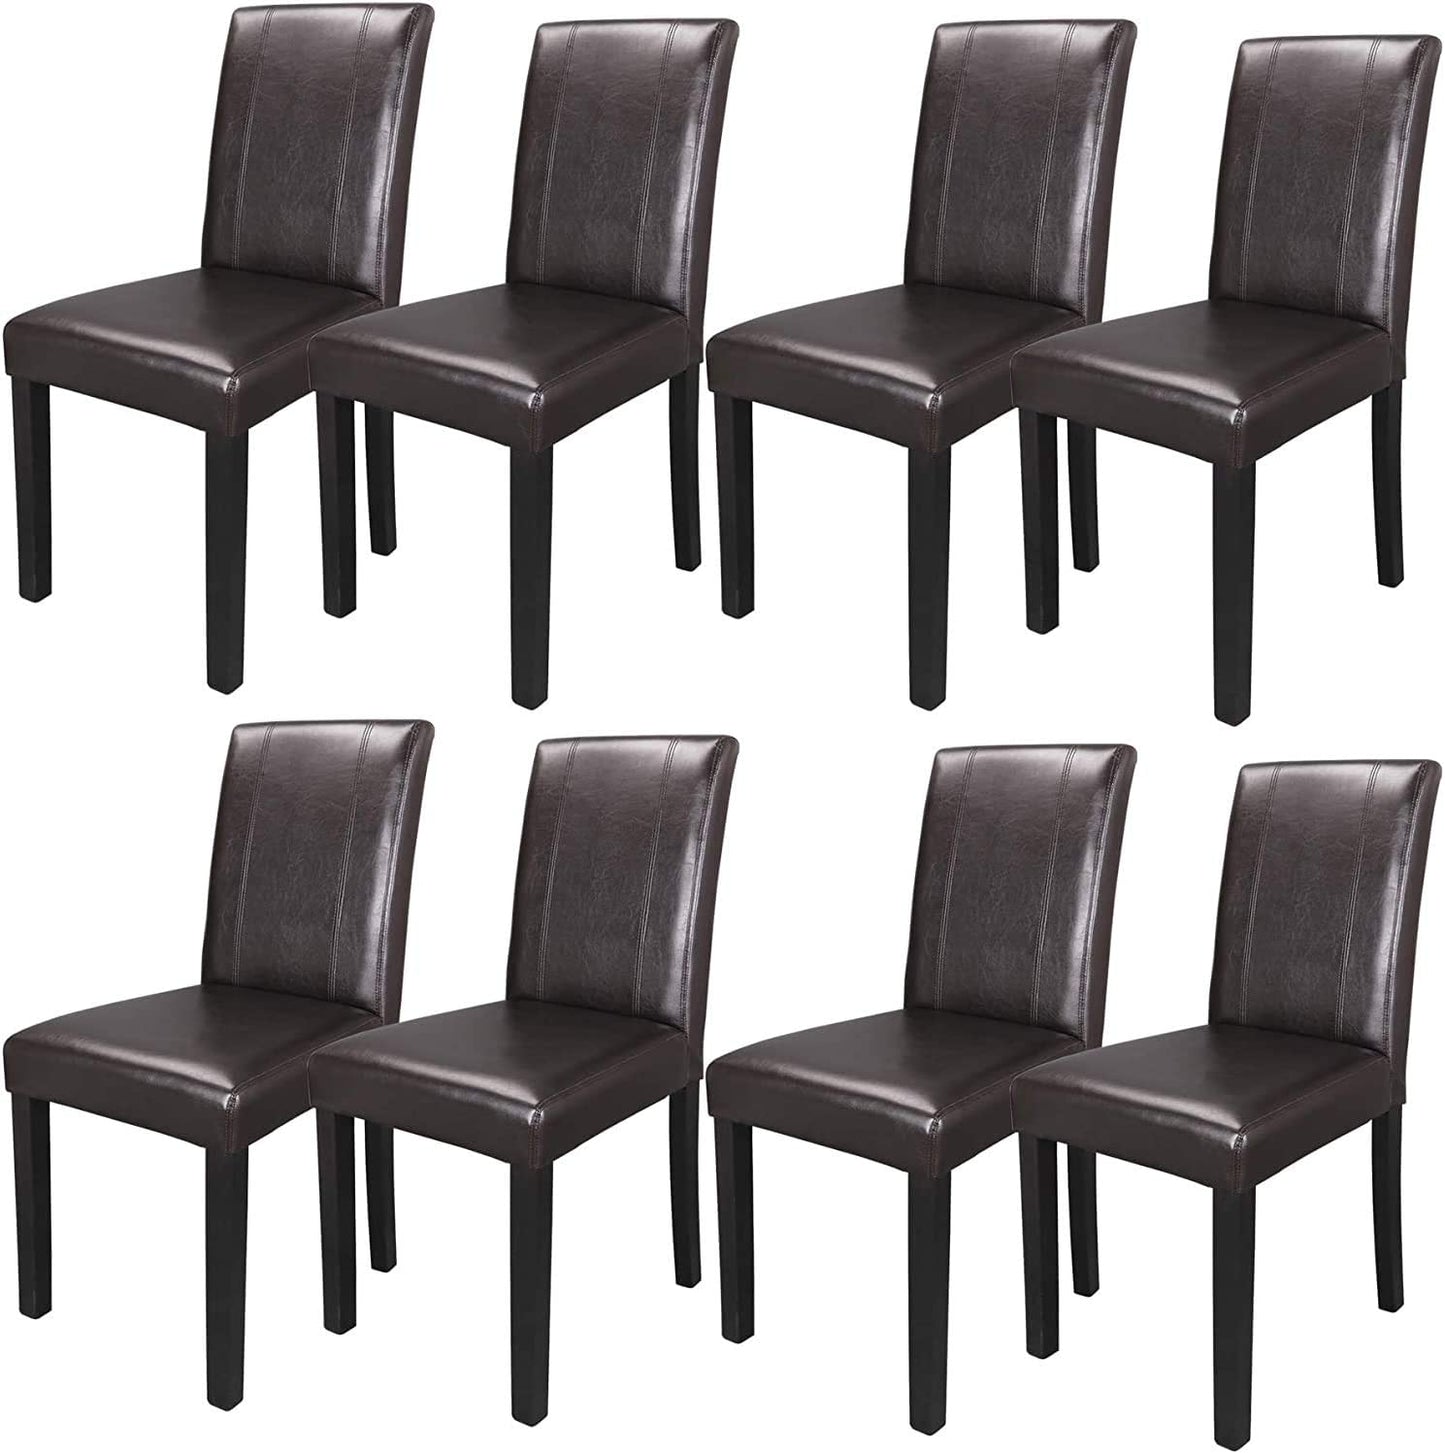 Set of 8 Leather Dining Room Chairs with Wood Legs Chair Urban Style